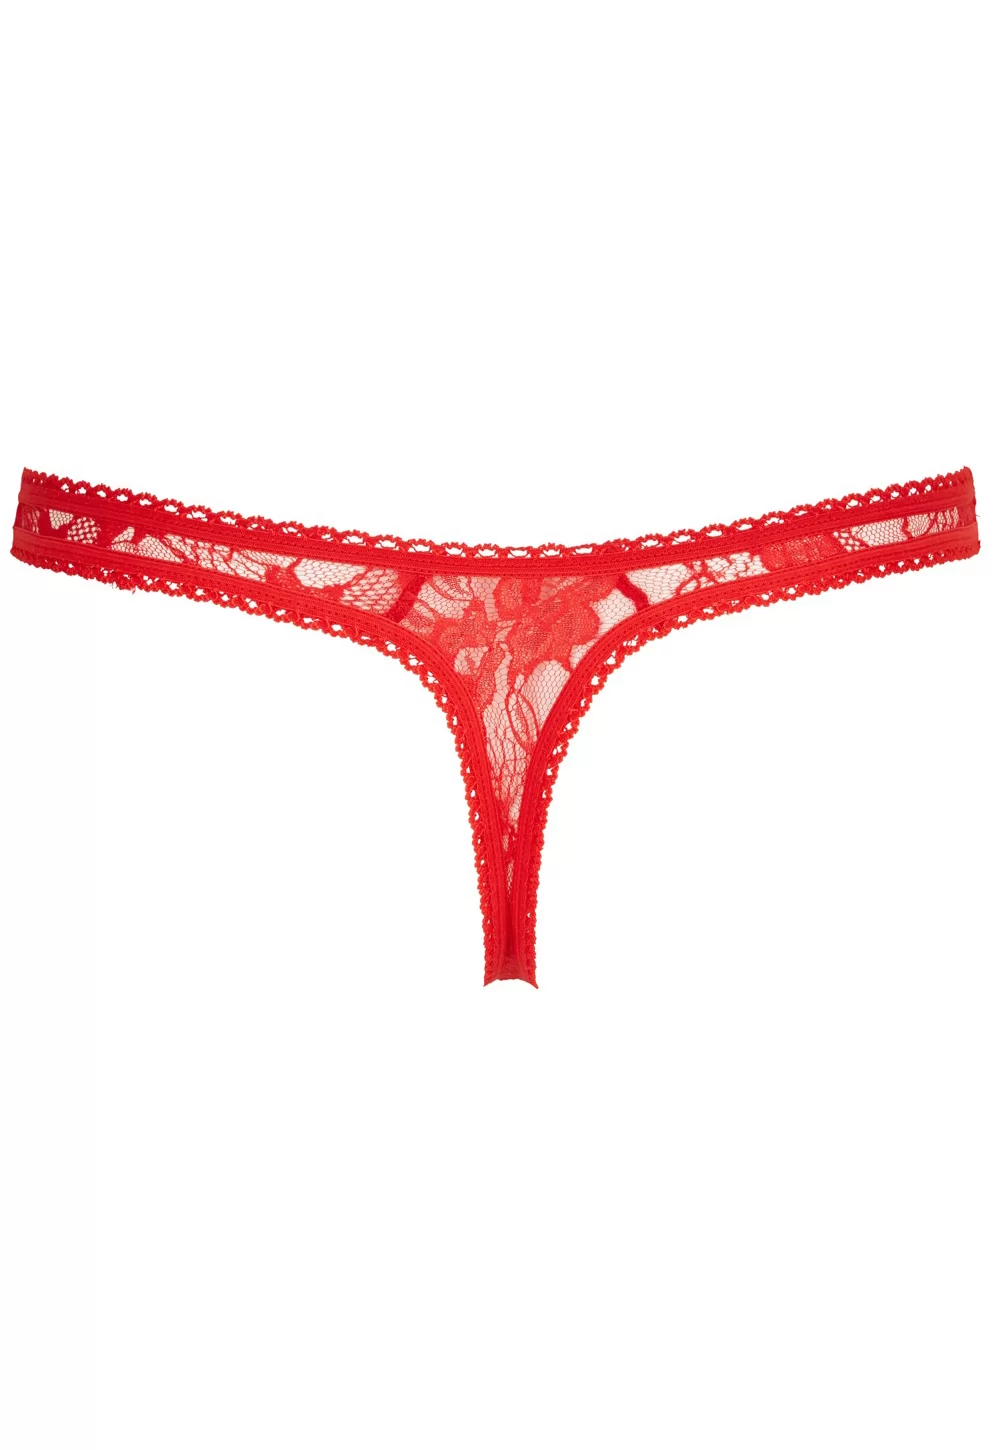 Crotchless Thong red lace